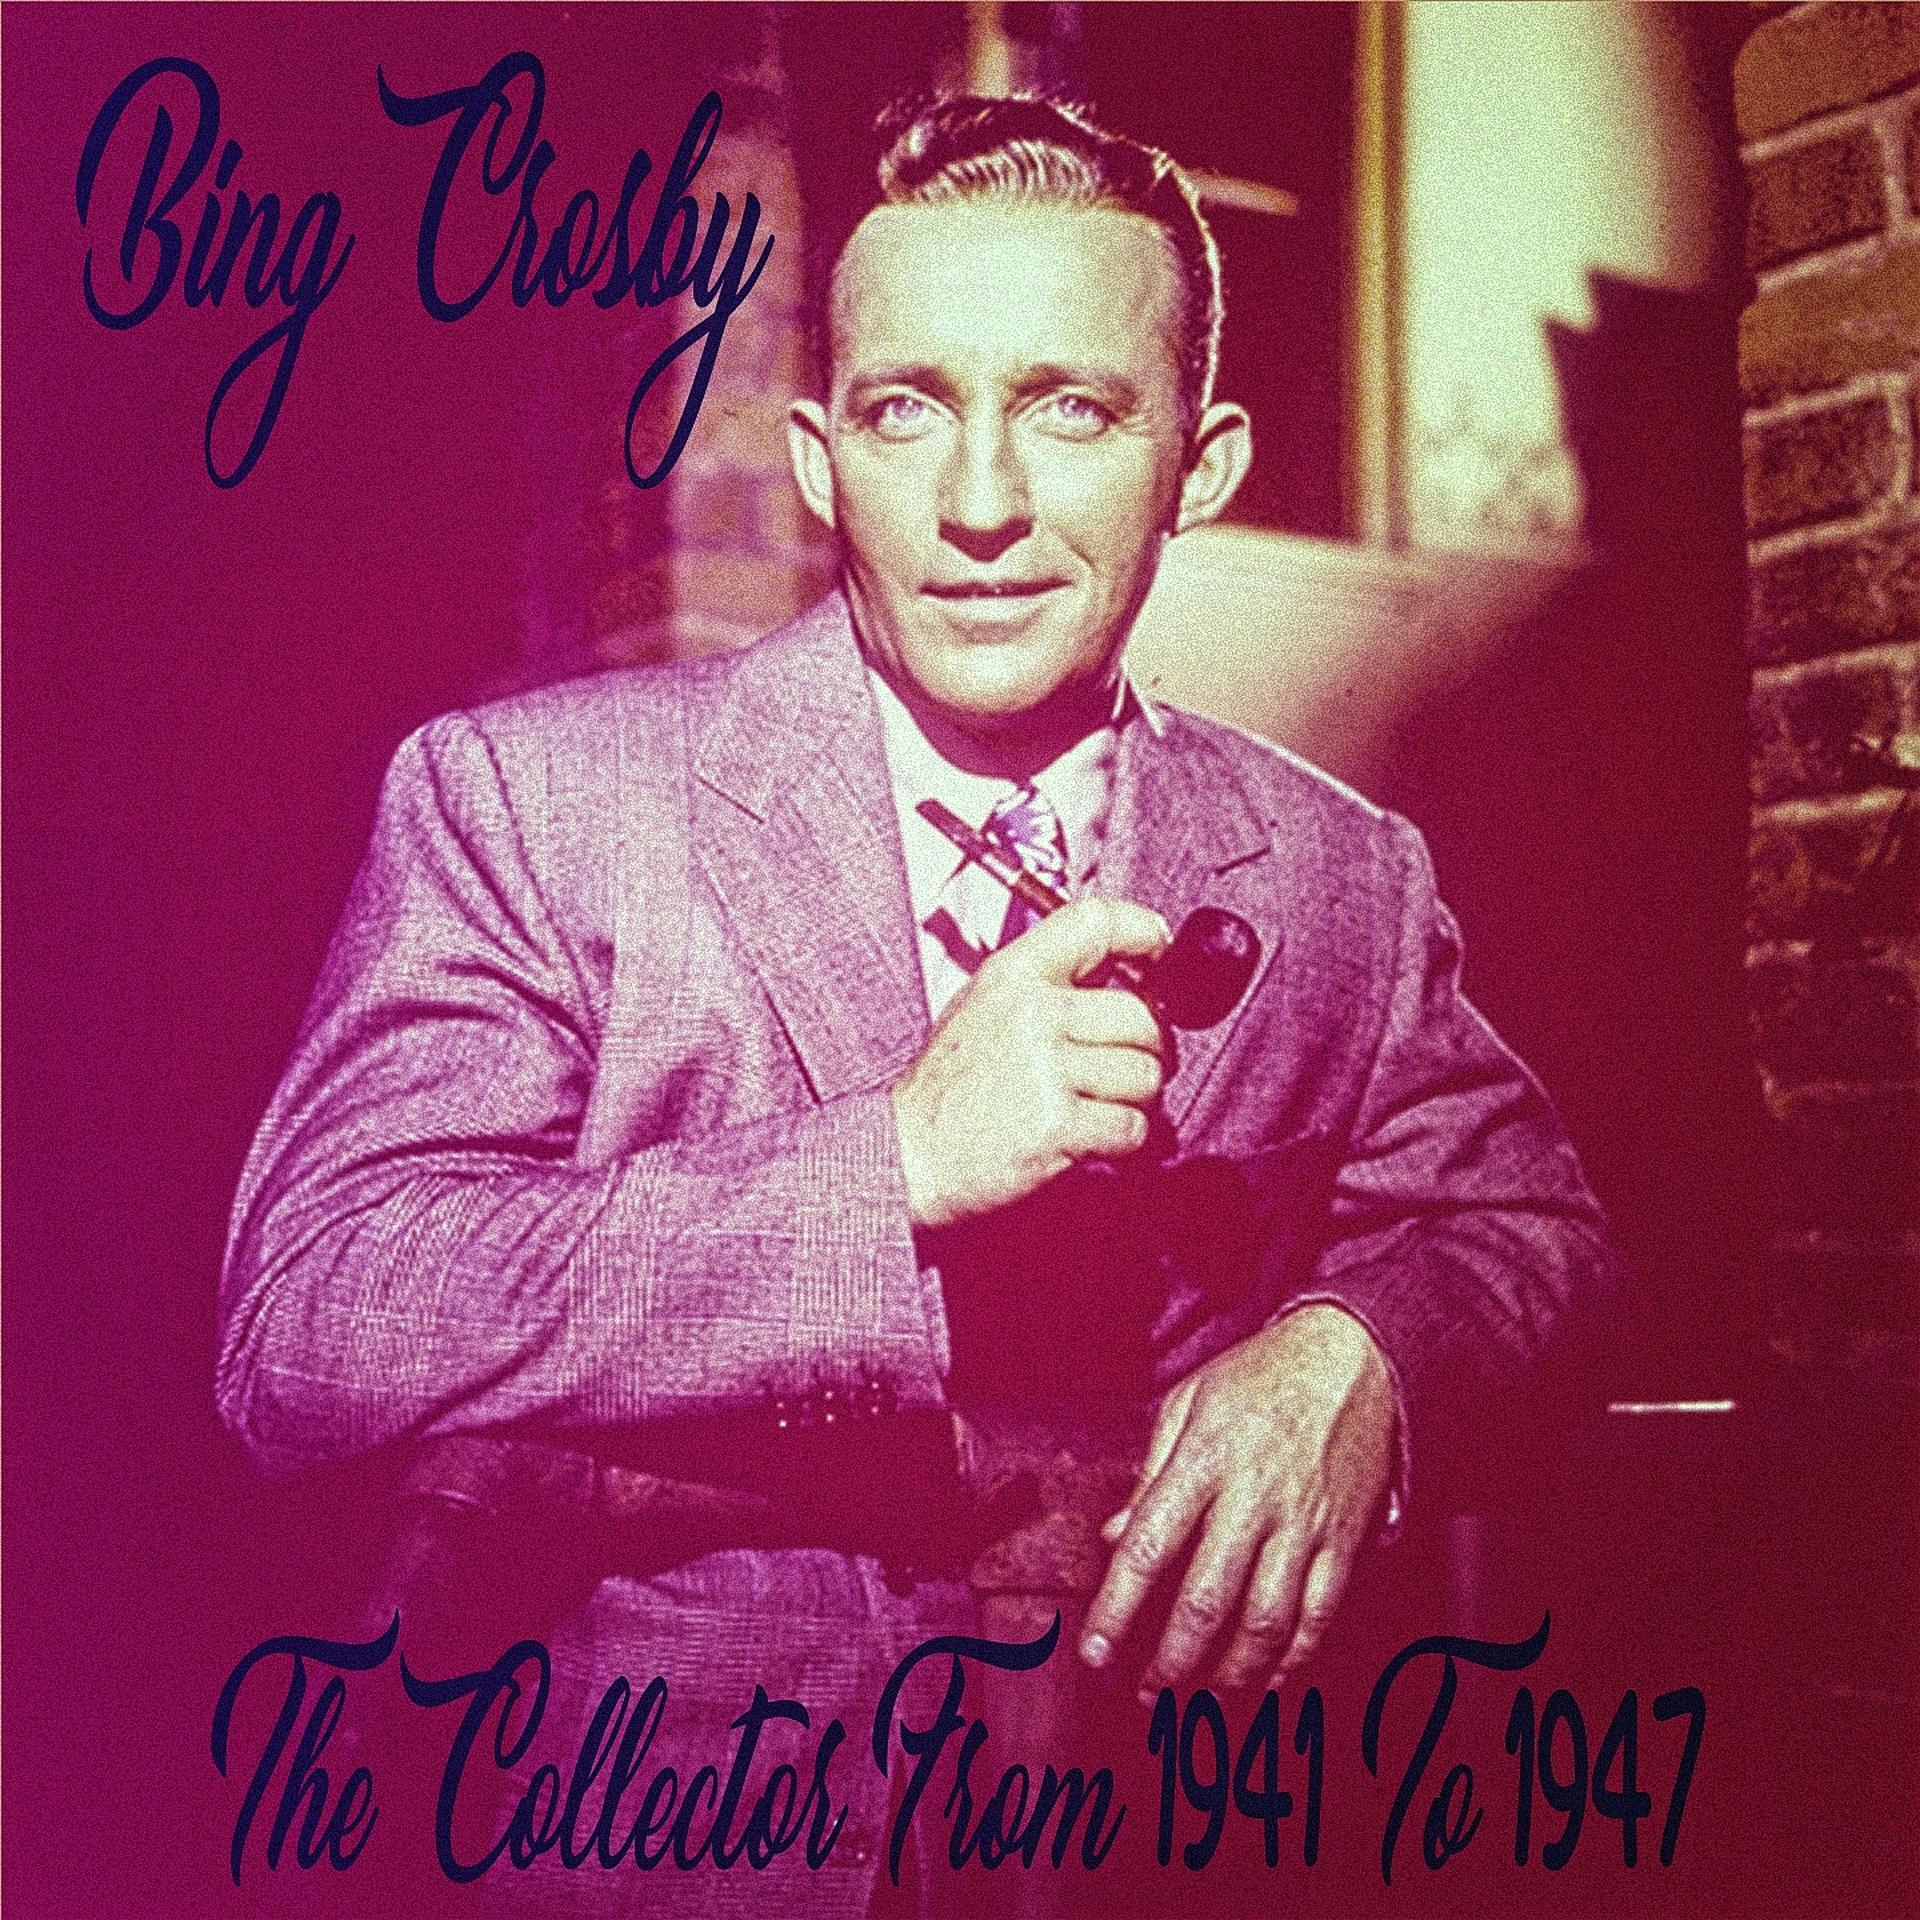 Постер альбома Bing Crosby The Collector From 1941 To 1947